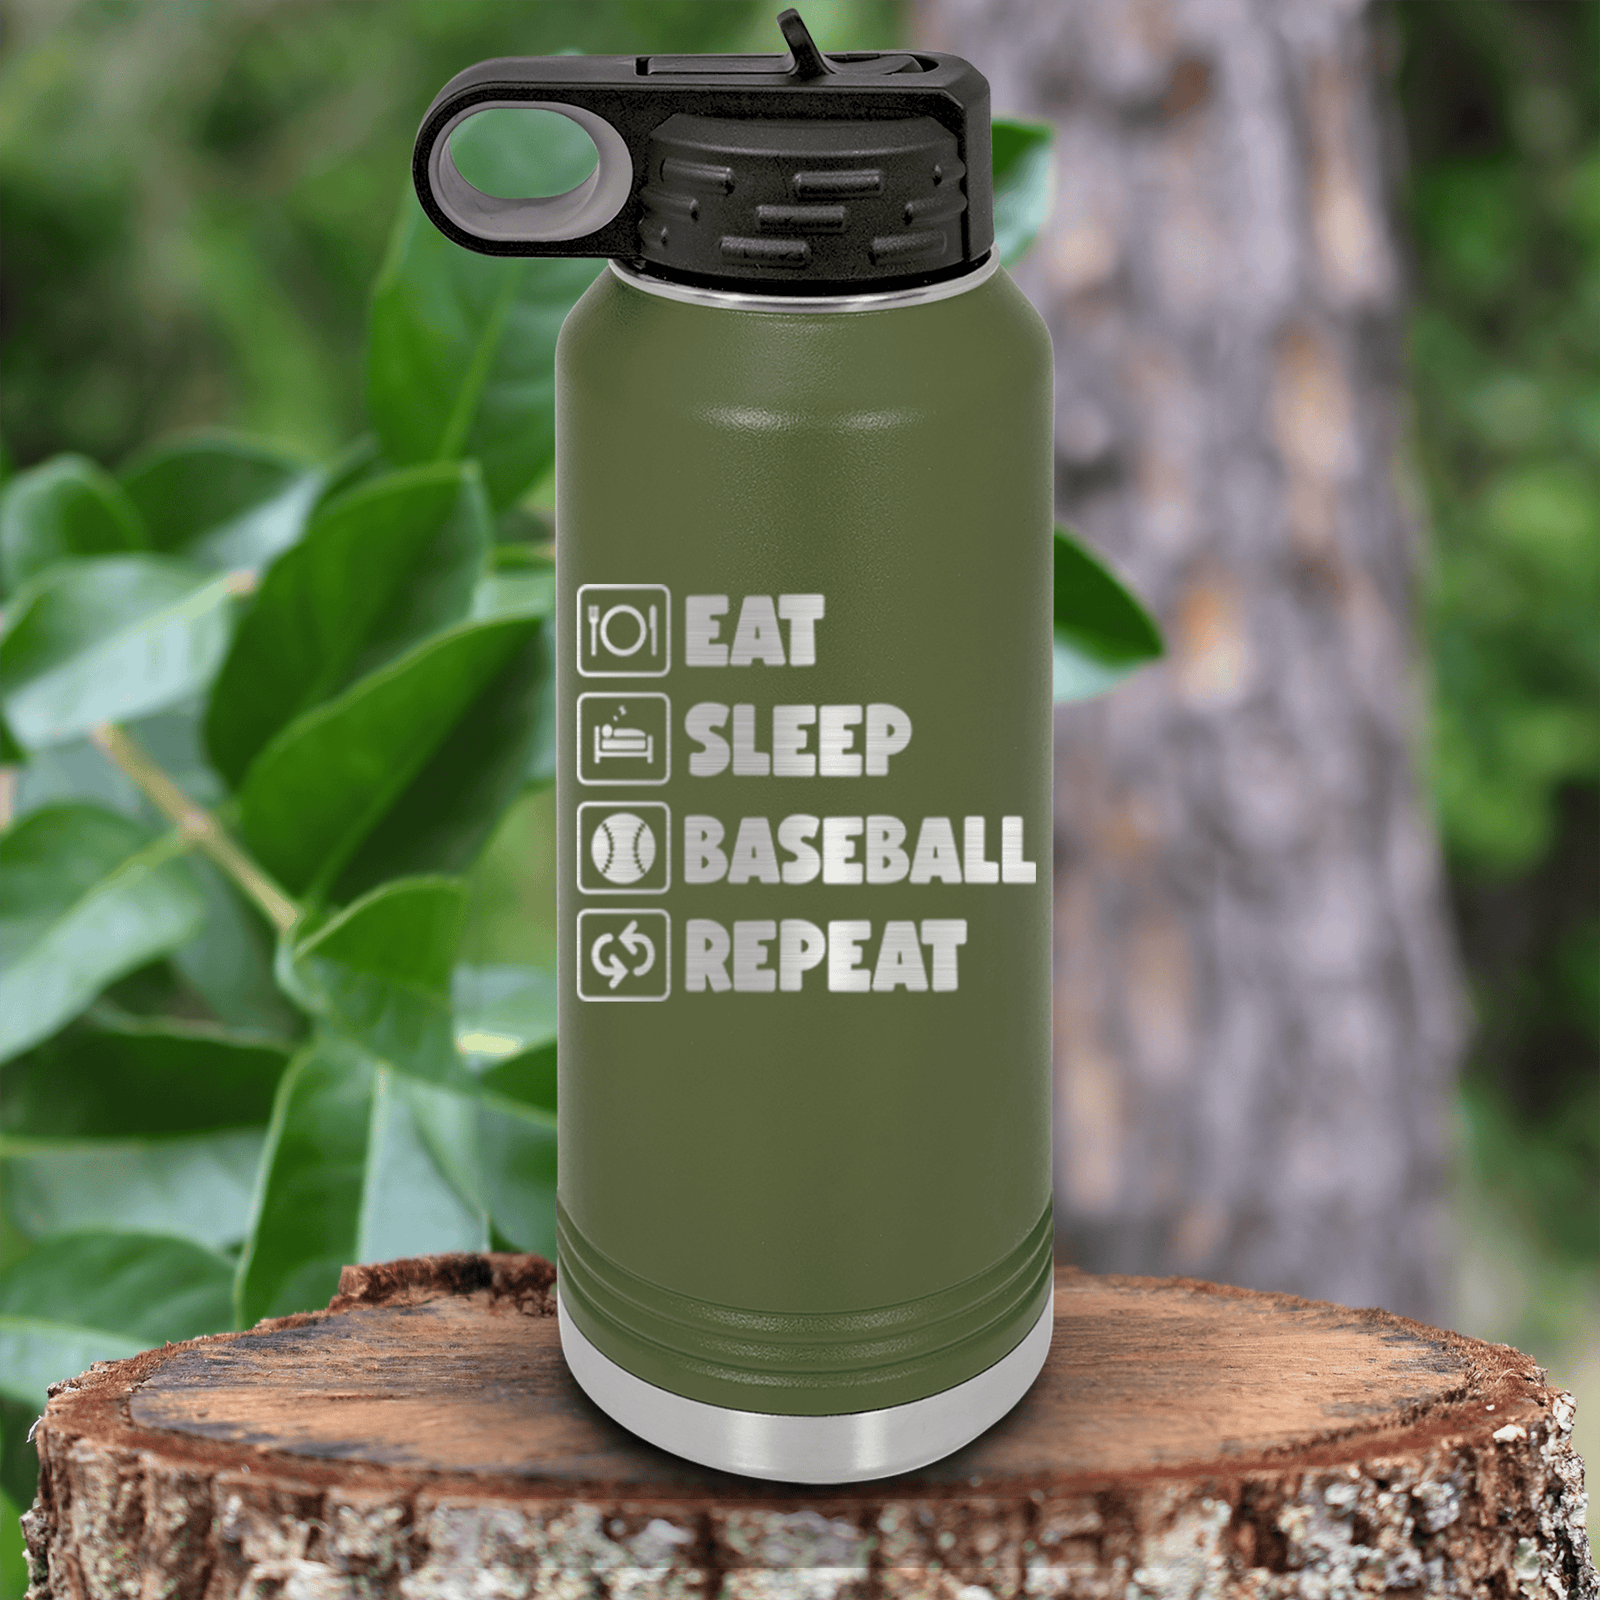 Military Green Baseball Water Bottle With The Baseball Routine Design